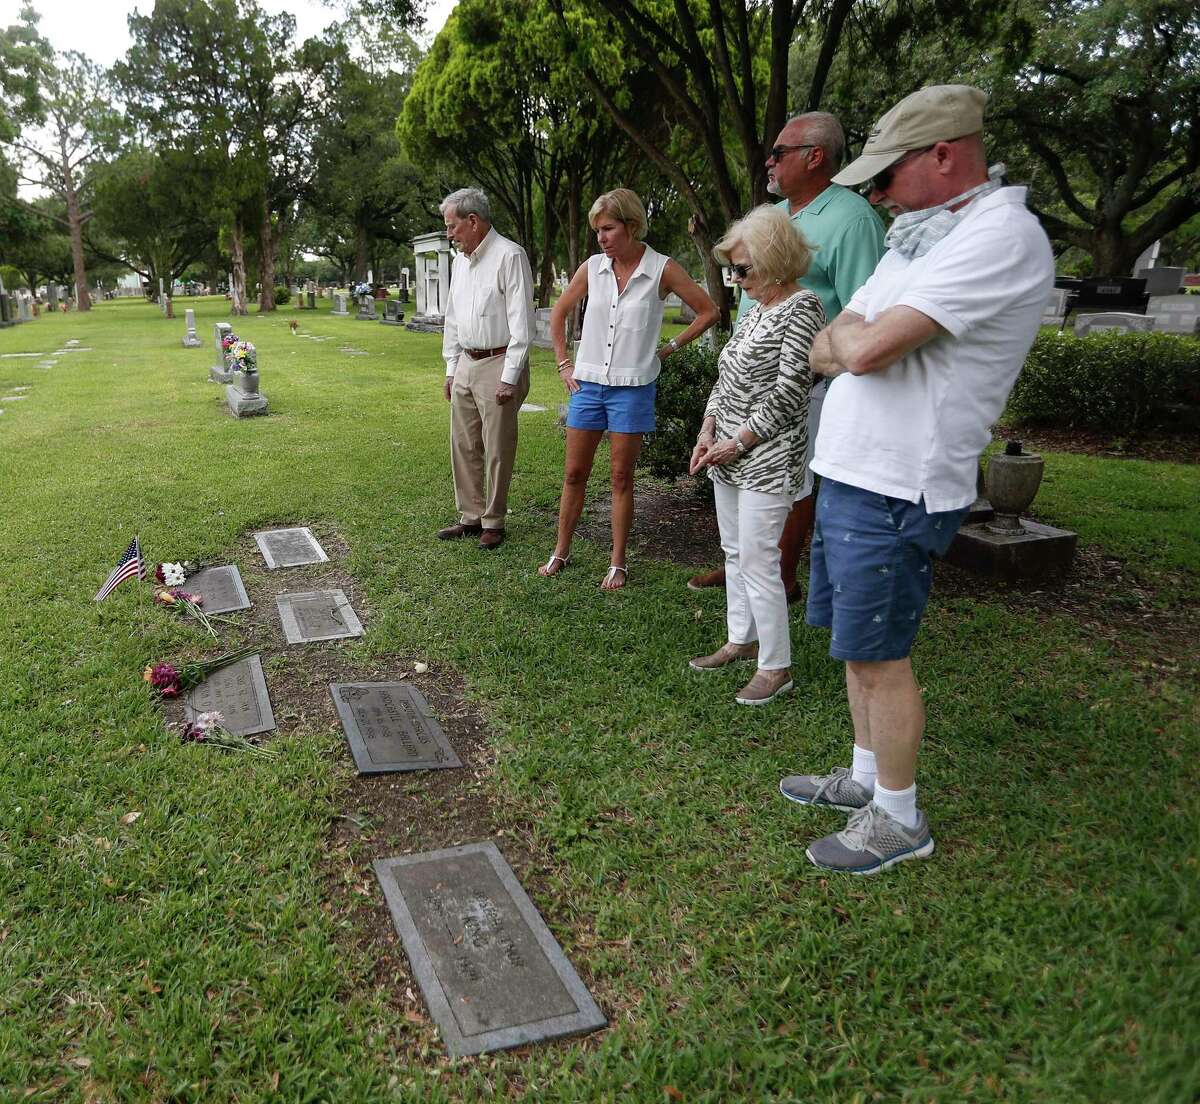 Bill Hosmer, Scotti and Scott Hohensce, Liz Wilson Smith and Jeff Wilson visit the gravesite Saturday of retired Army Col. Ovid “Zero” Wilson at Forest Park Westheimer Cemetery in Houston. As a prisoner of war in the Philippines, “Zero” Wilson survived the Bataan Death March in 1942.